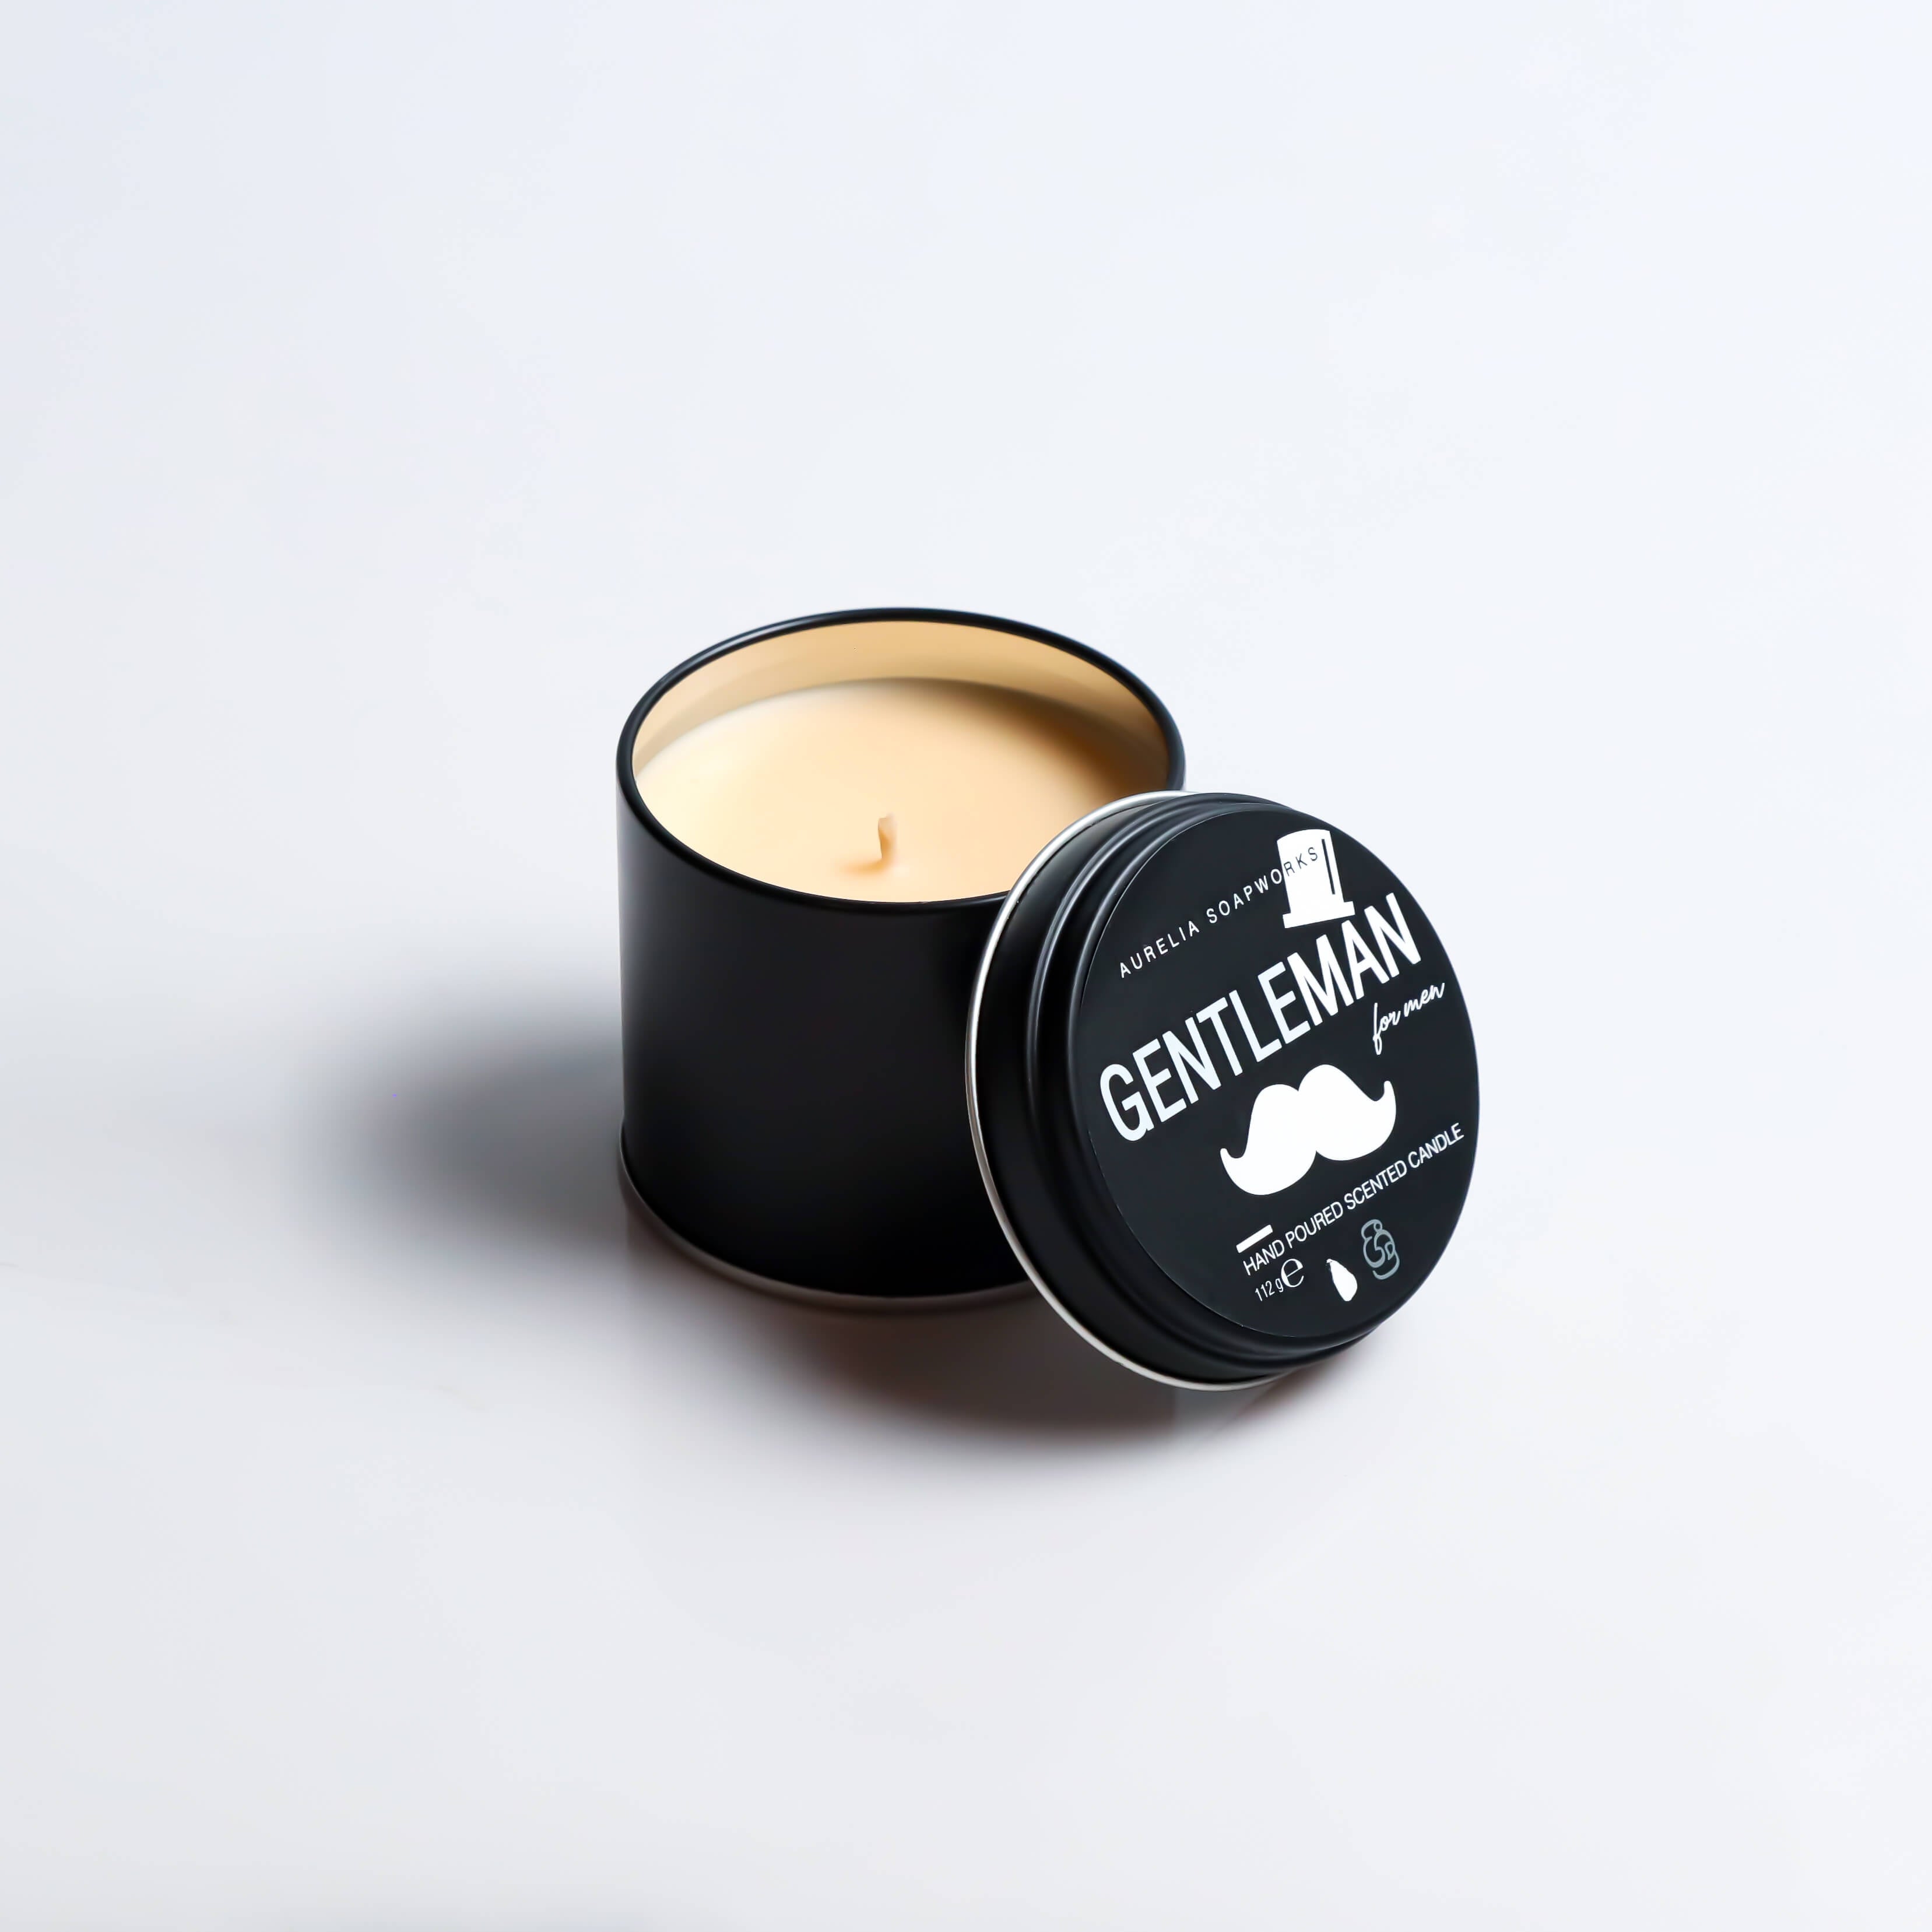 Gentleman Scented Candle